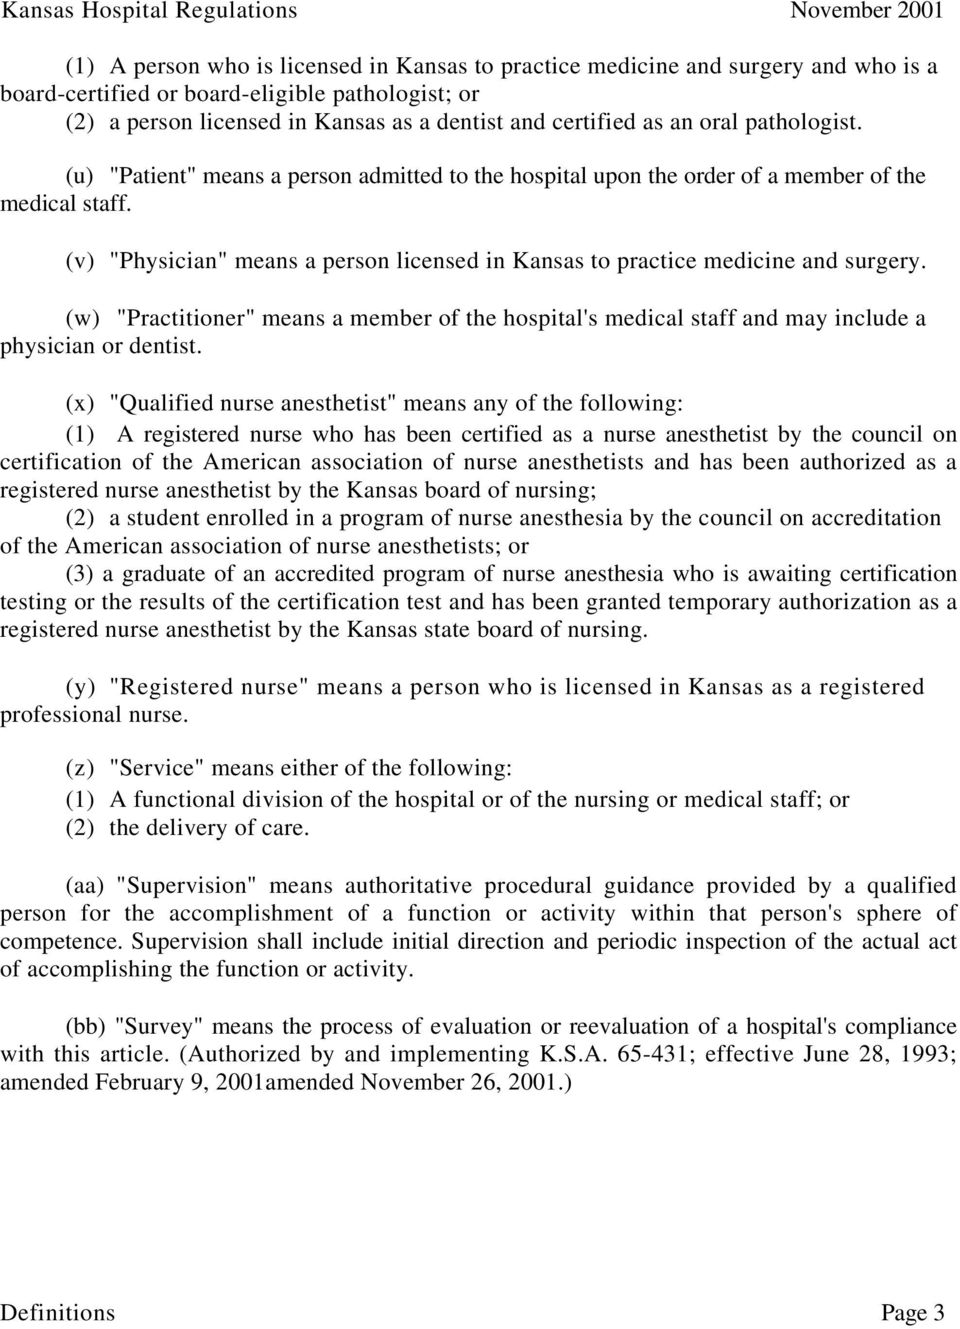 (v) "Physician" means a person licensed in Kansas to practice medicine and surgery. (w) "Practitioner" means a member of the hospital's medical staff and may include a physician or dentist.